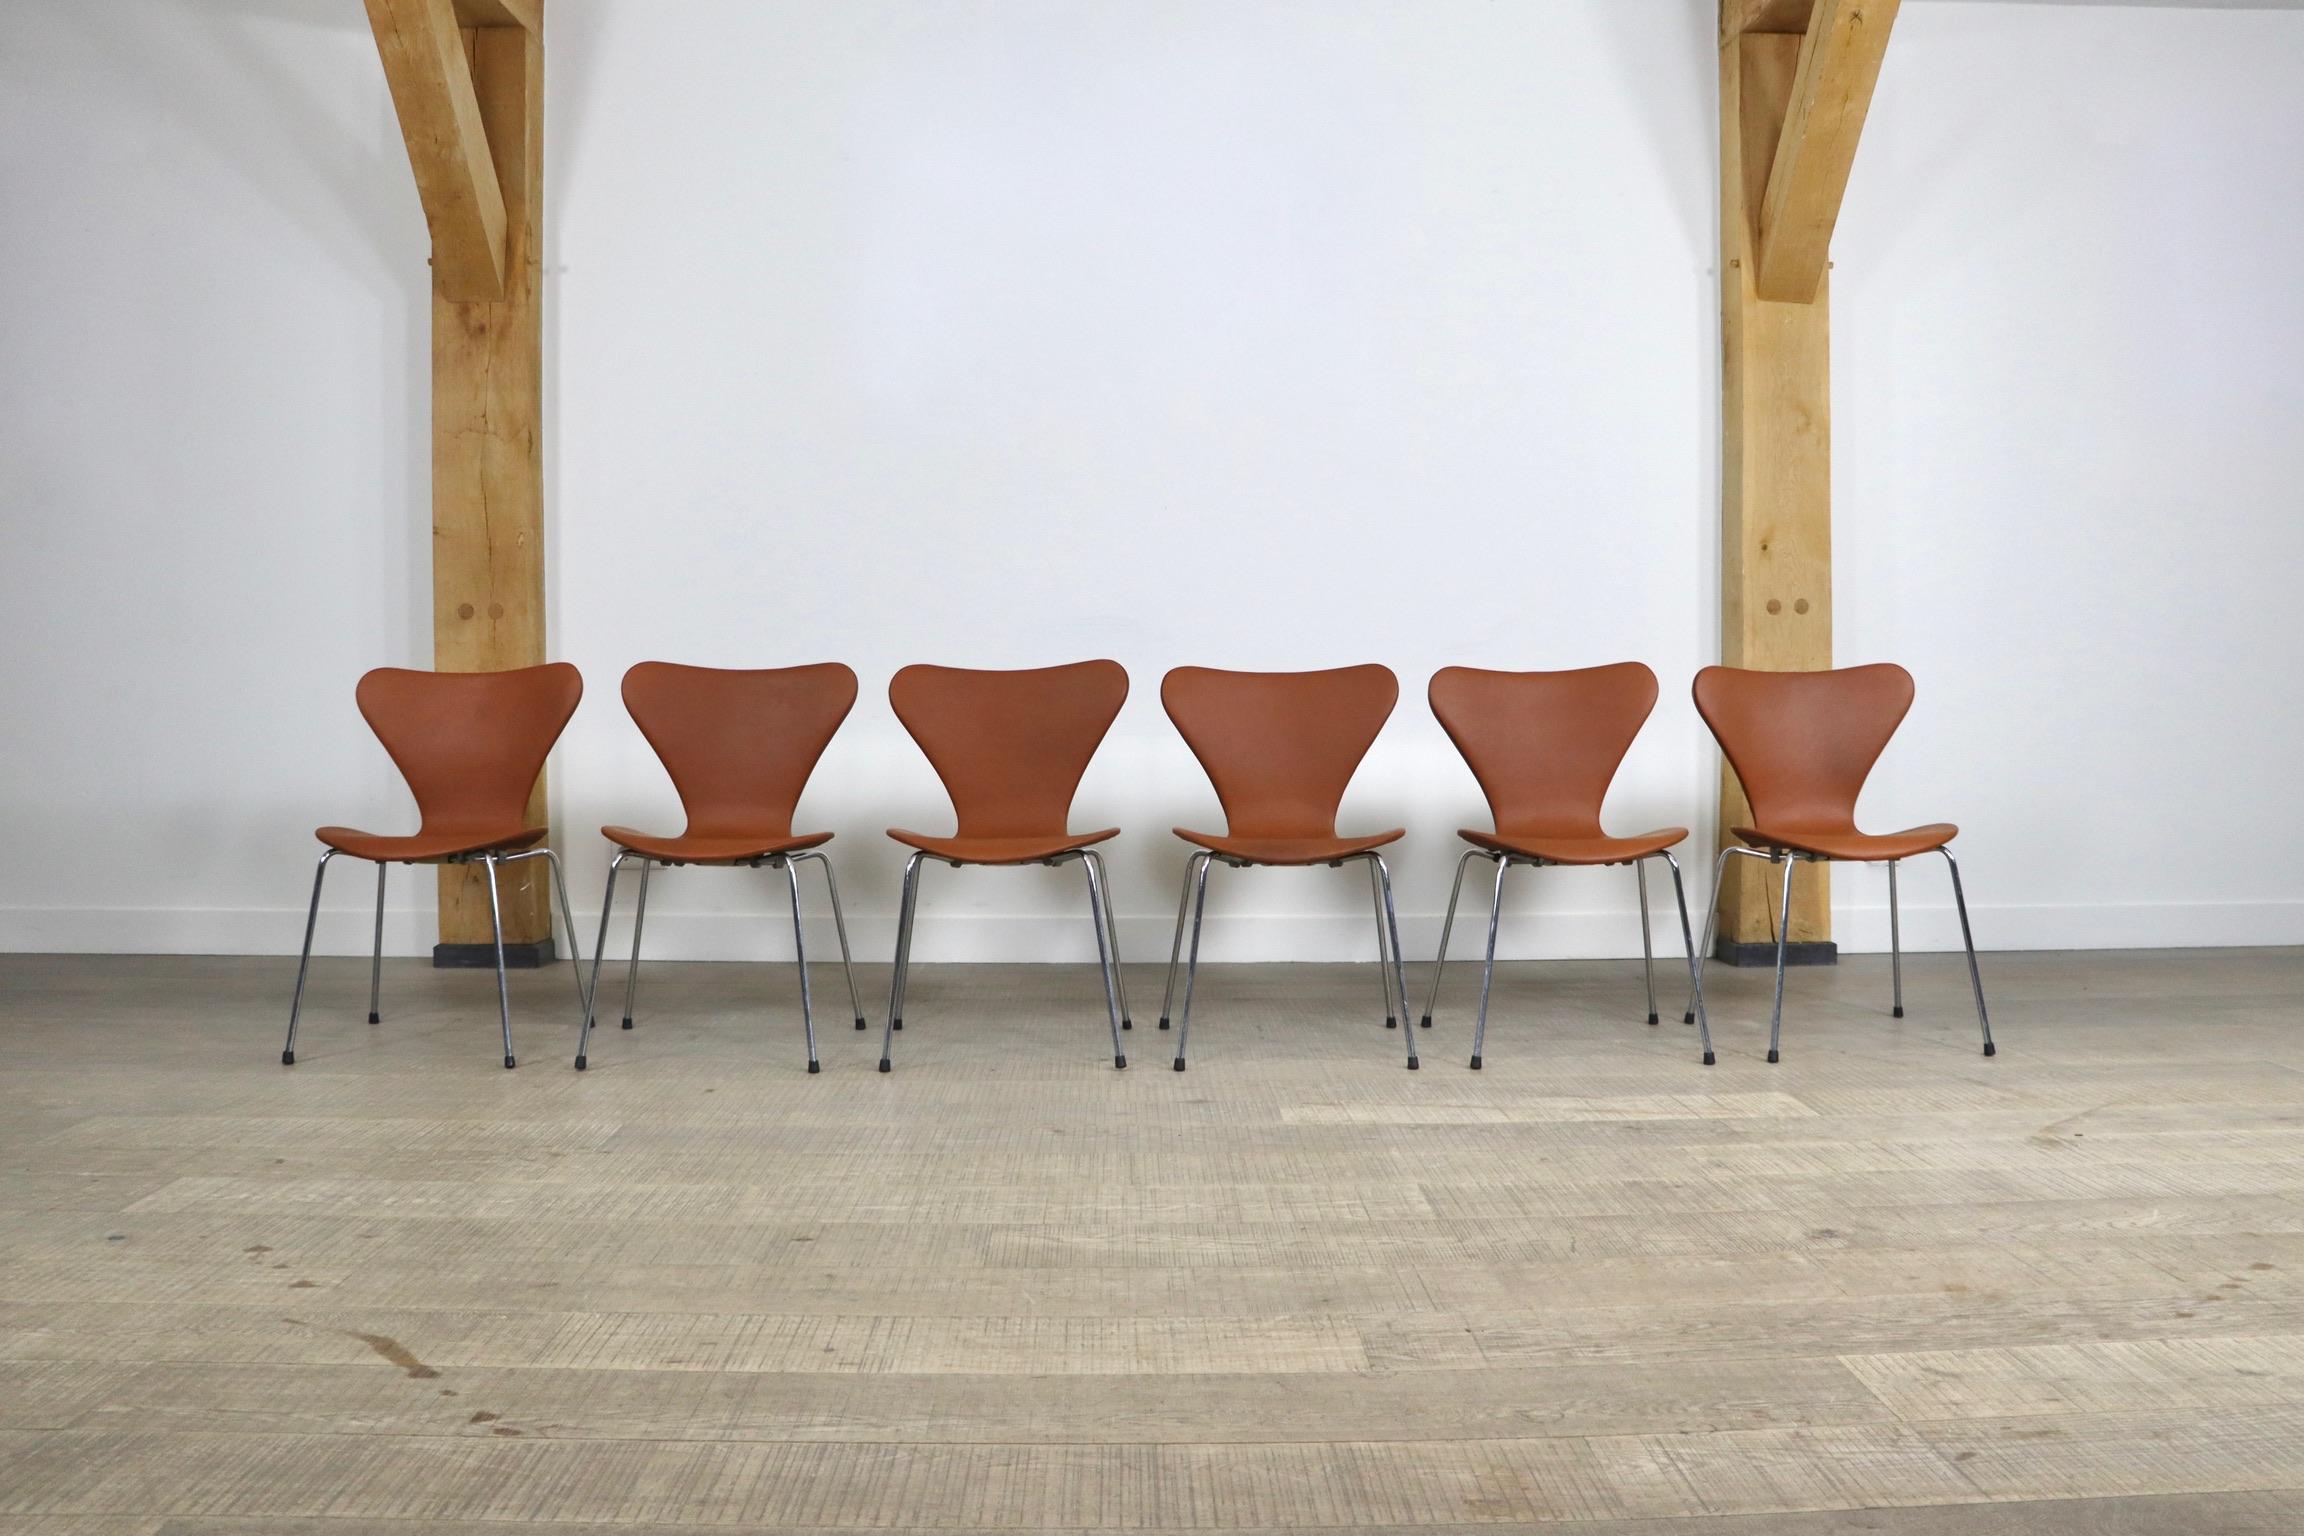 Amazing set of 6 Butterfly chairs designed by Arne Jacobsen for Fritz Hansen, Denmark 1979. These chairs are upholstered in beautiful cognac aniline leather and are in excellent condition. A minimalistic timeless design which has always been